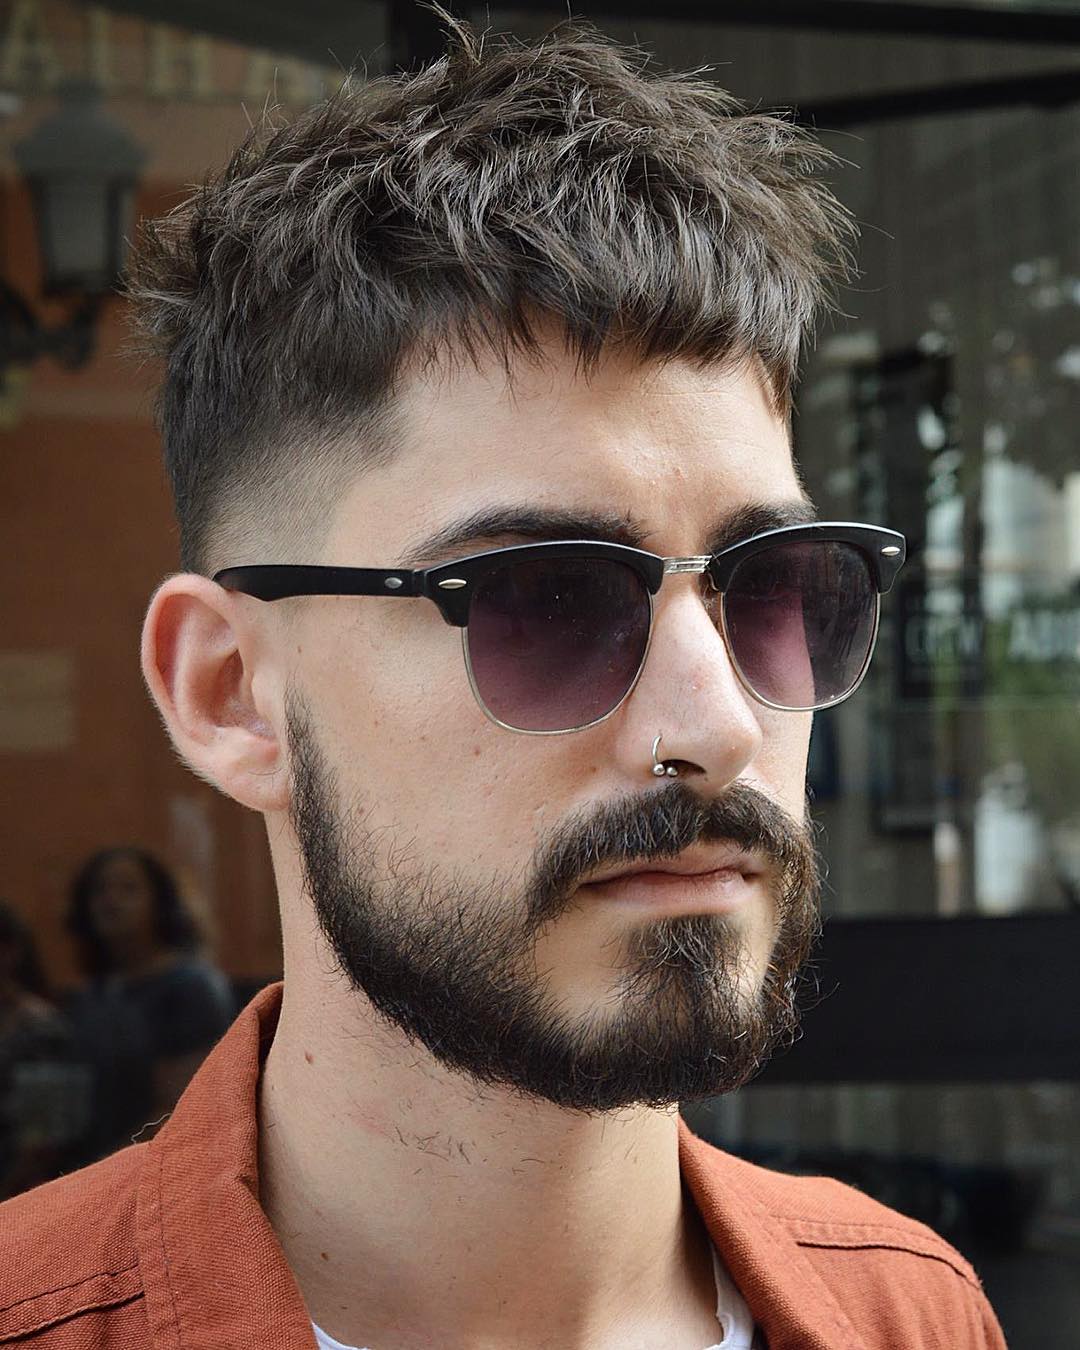 virogas-barber-messy-crop-haircut-short-hairstyle-for-men